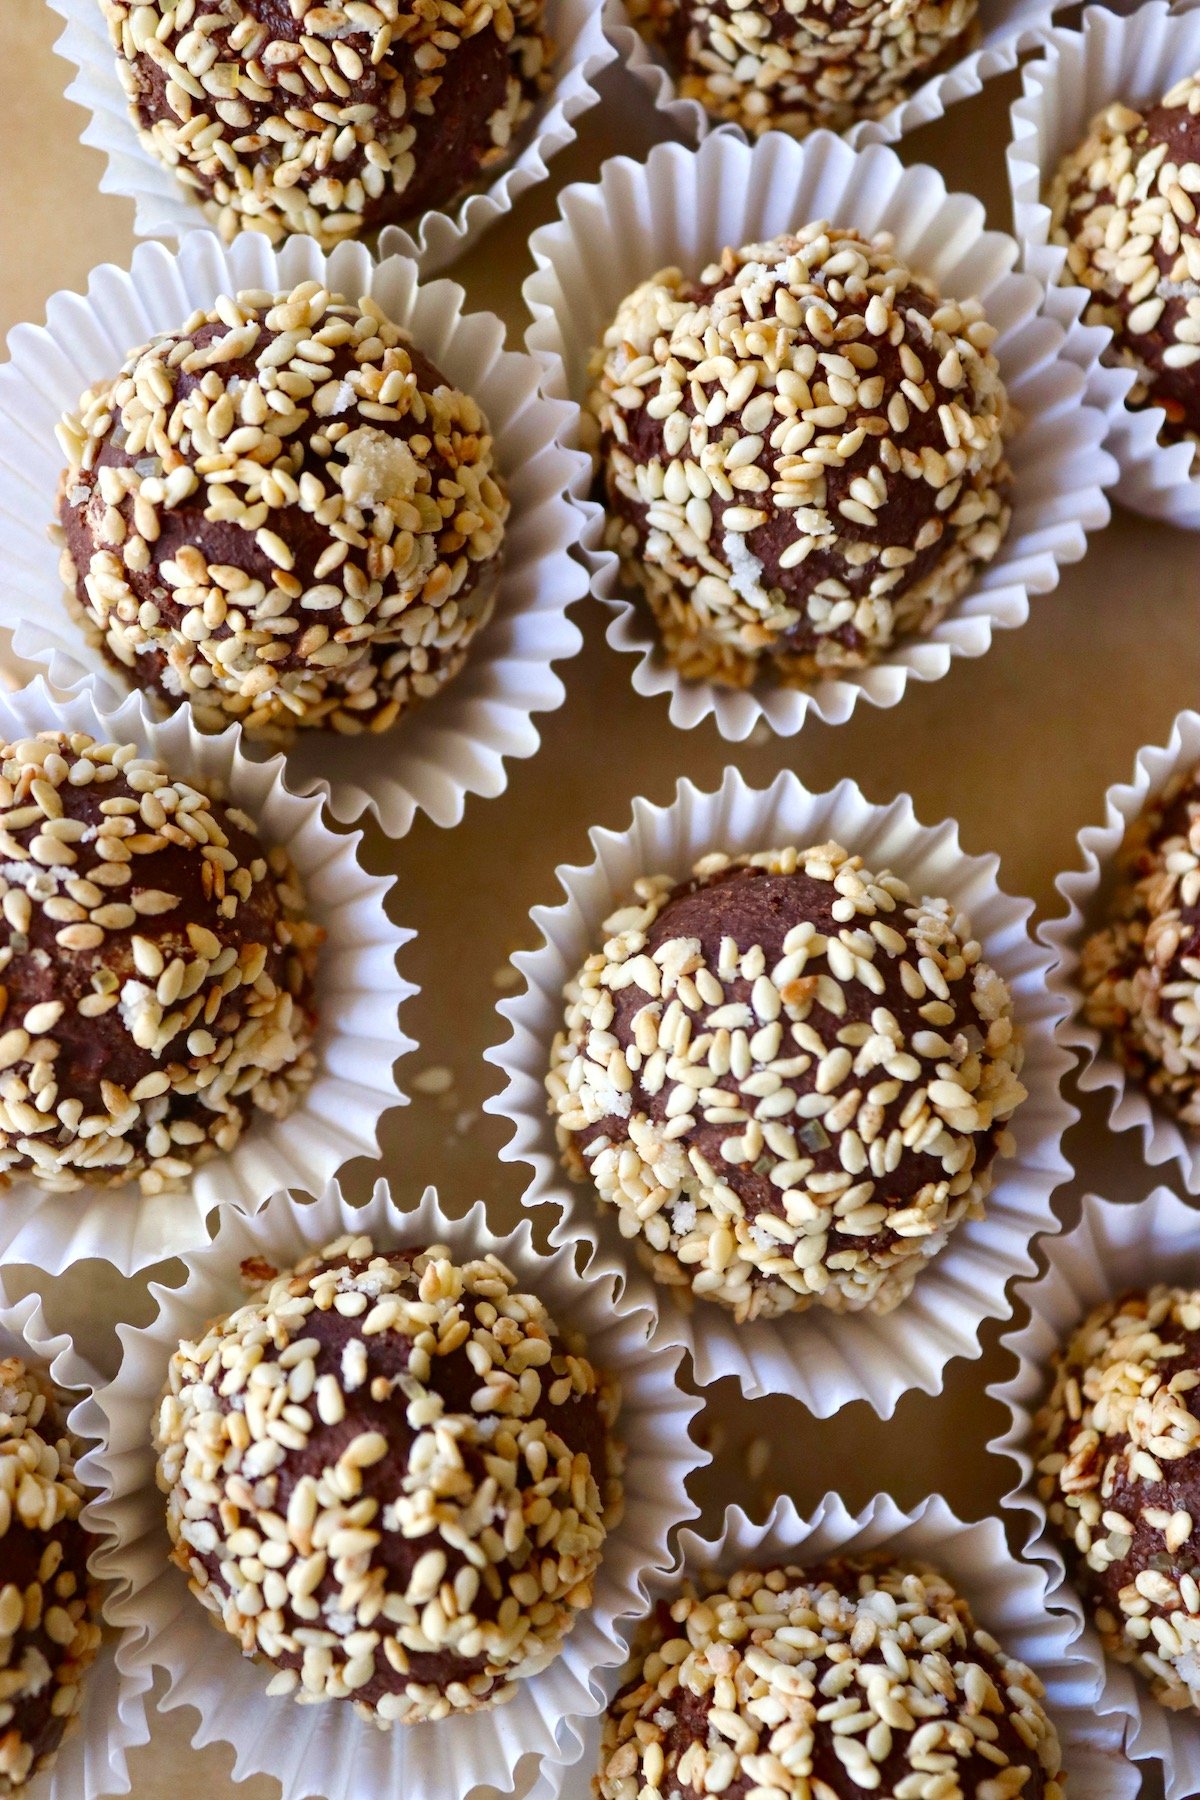 Several sesame seed coated chocolate truffles in white paper cups.